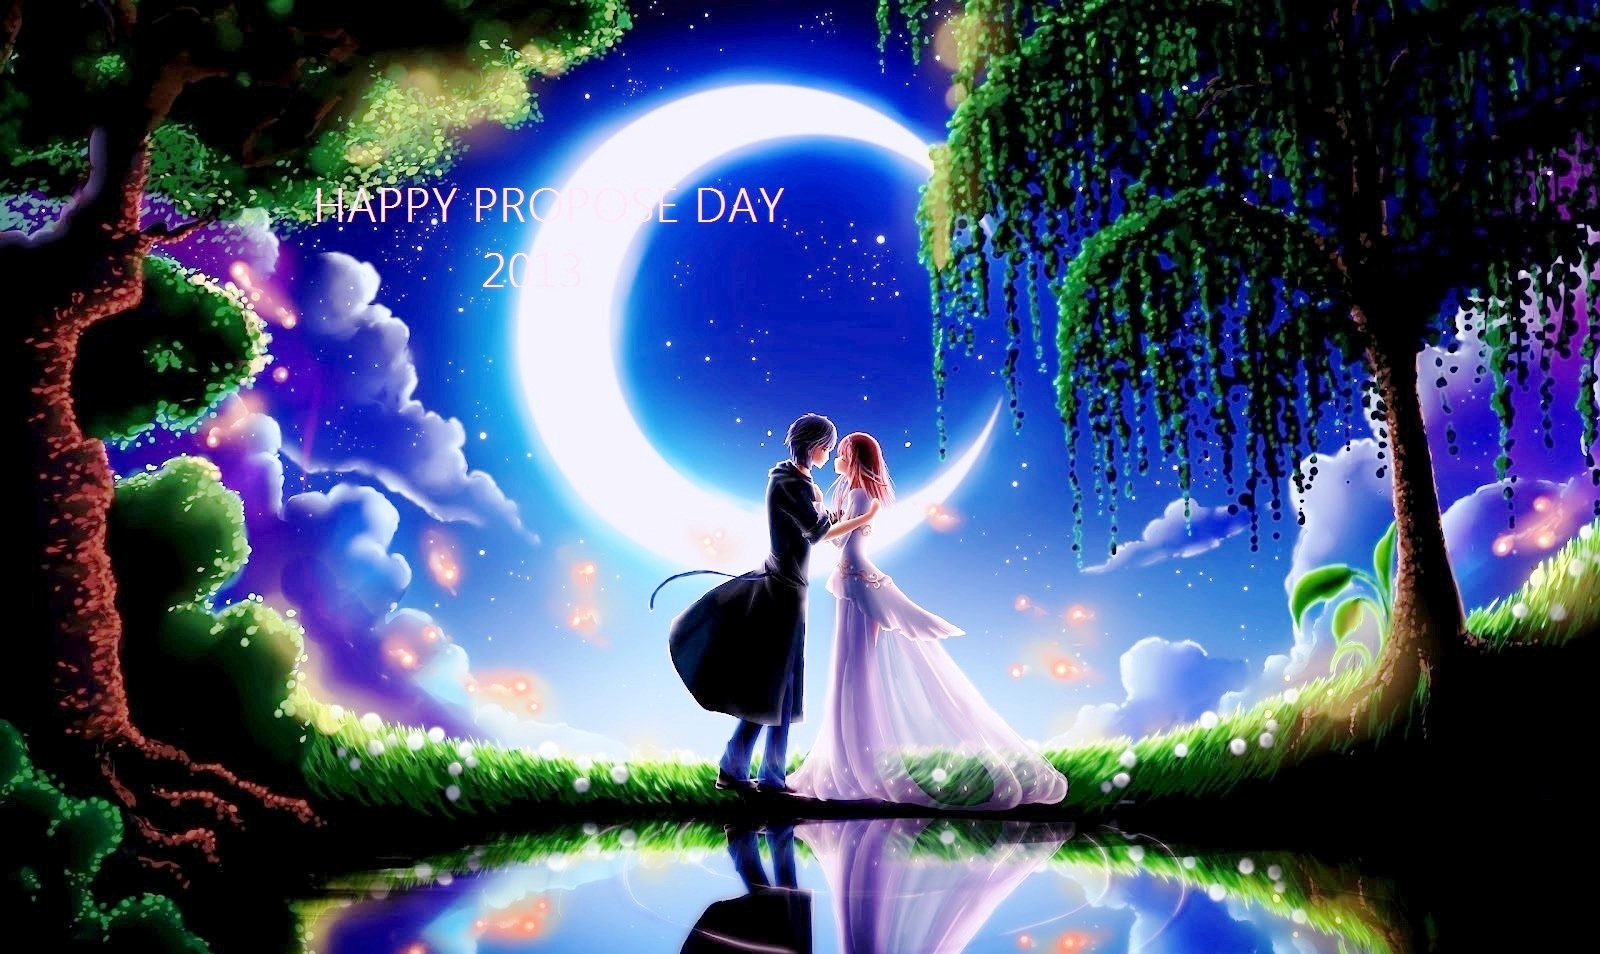 Happy Propose Day Amazing Wallpaper